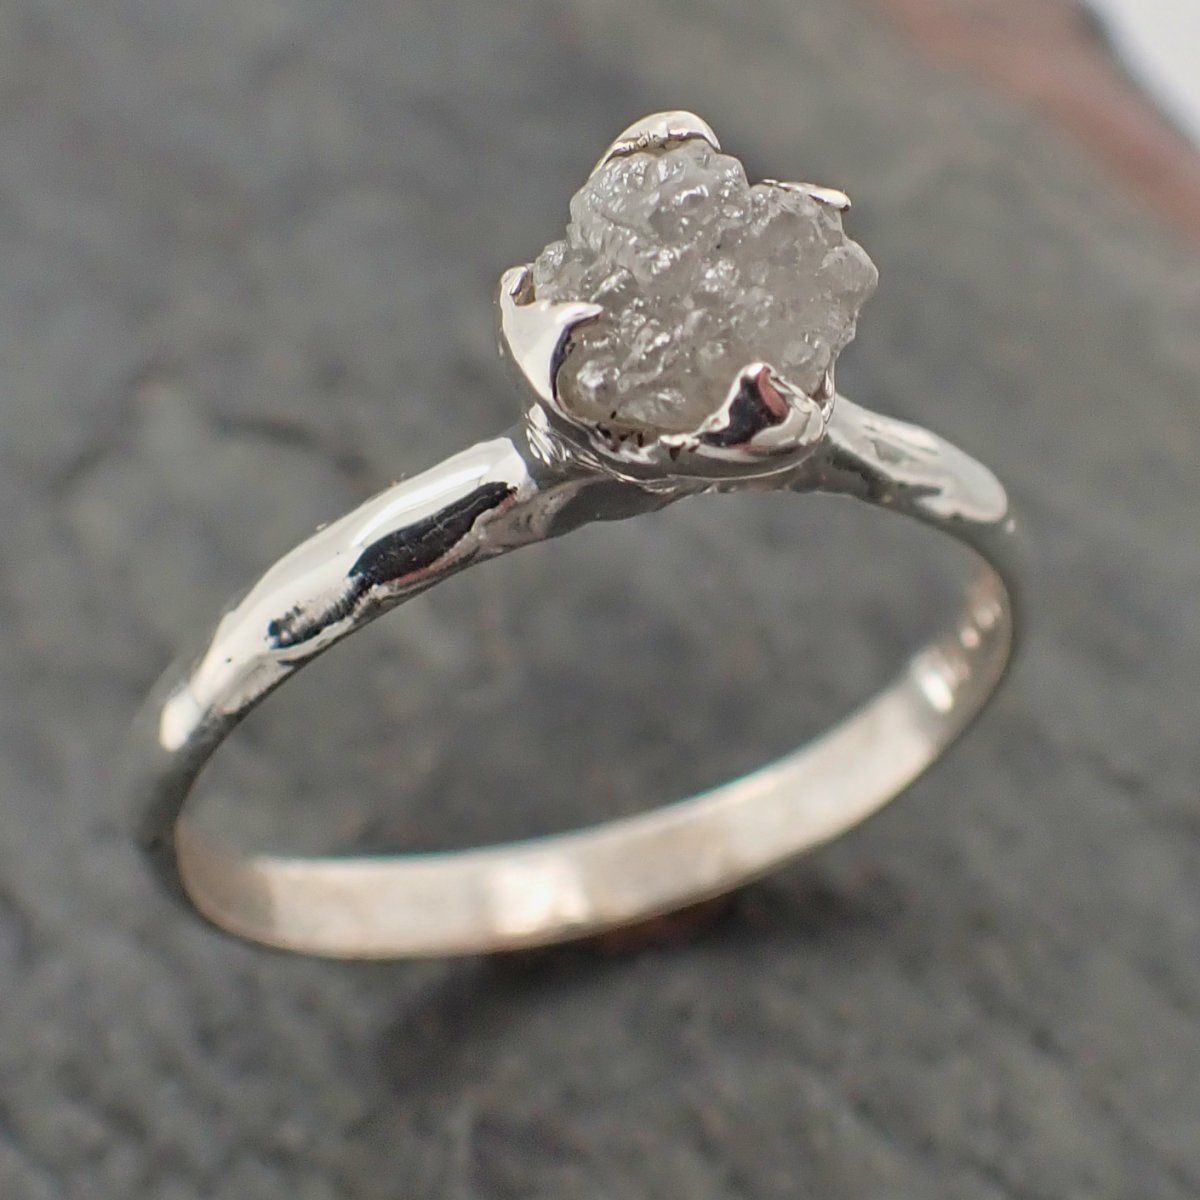 raw rough diamond engagement stacking ring solitaire silver ring recycled ss00063 Alternative Engagement